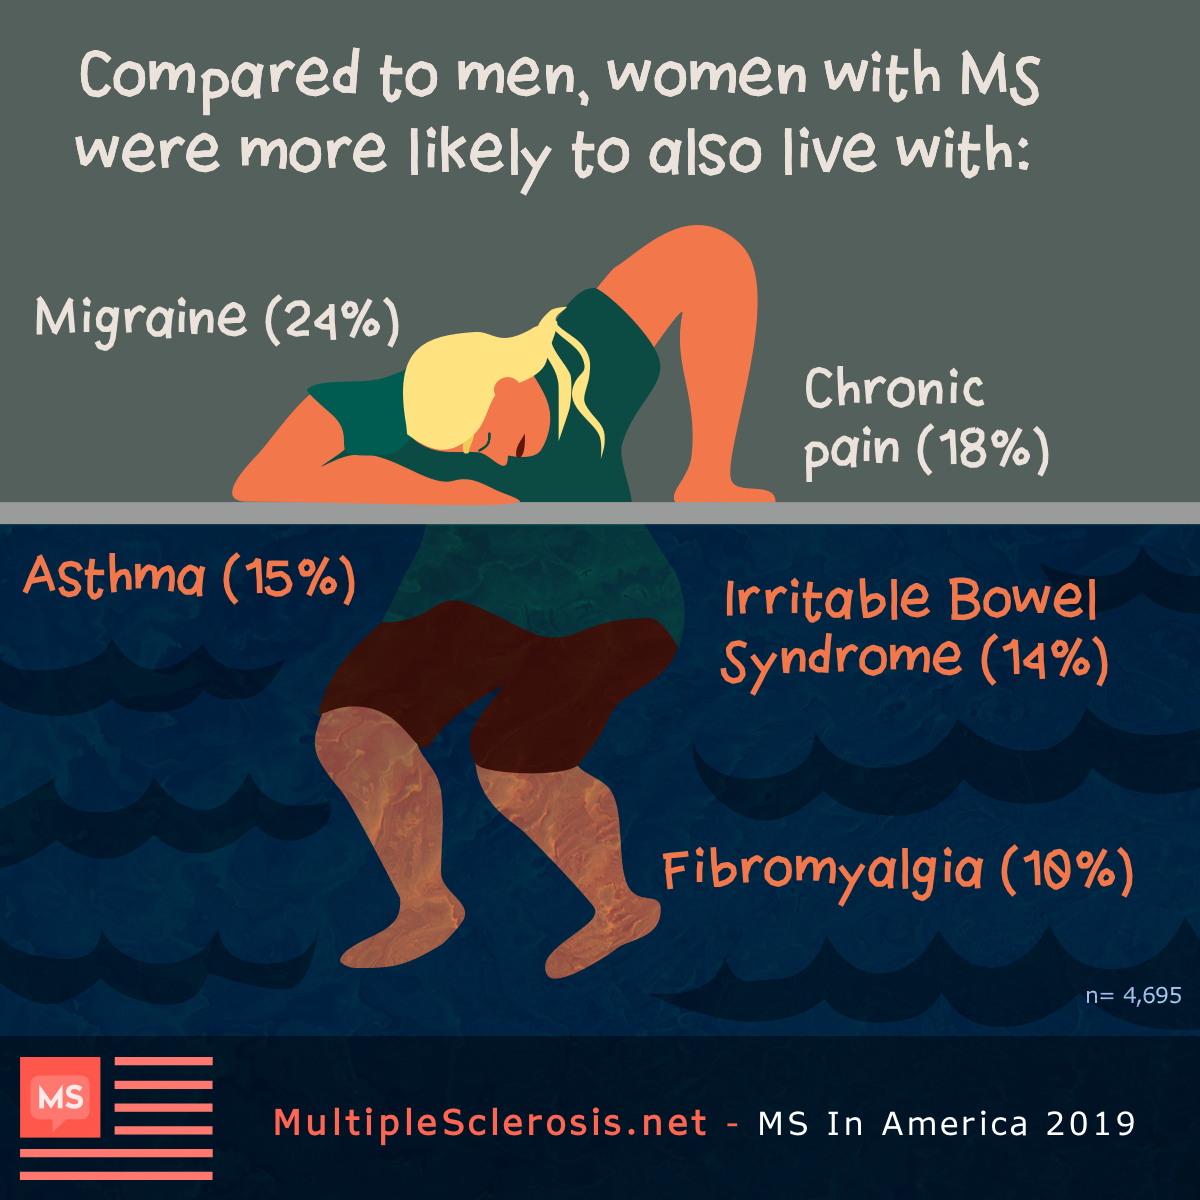 Women were more likely to also live with migraine (24%), asthma (15%), chronic pain (18%), irritable bowel syndrome (14%), and fibromyalgia (10%).